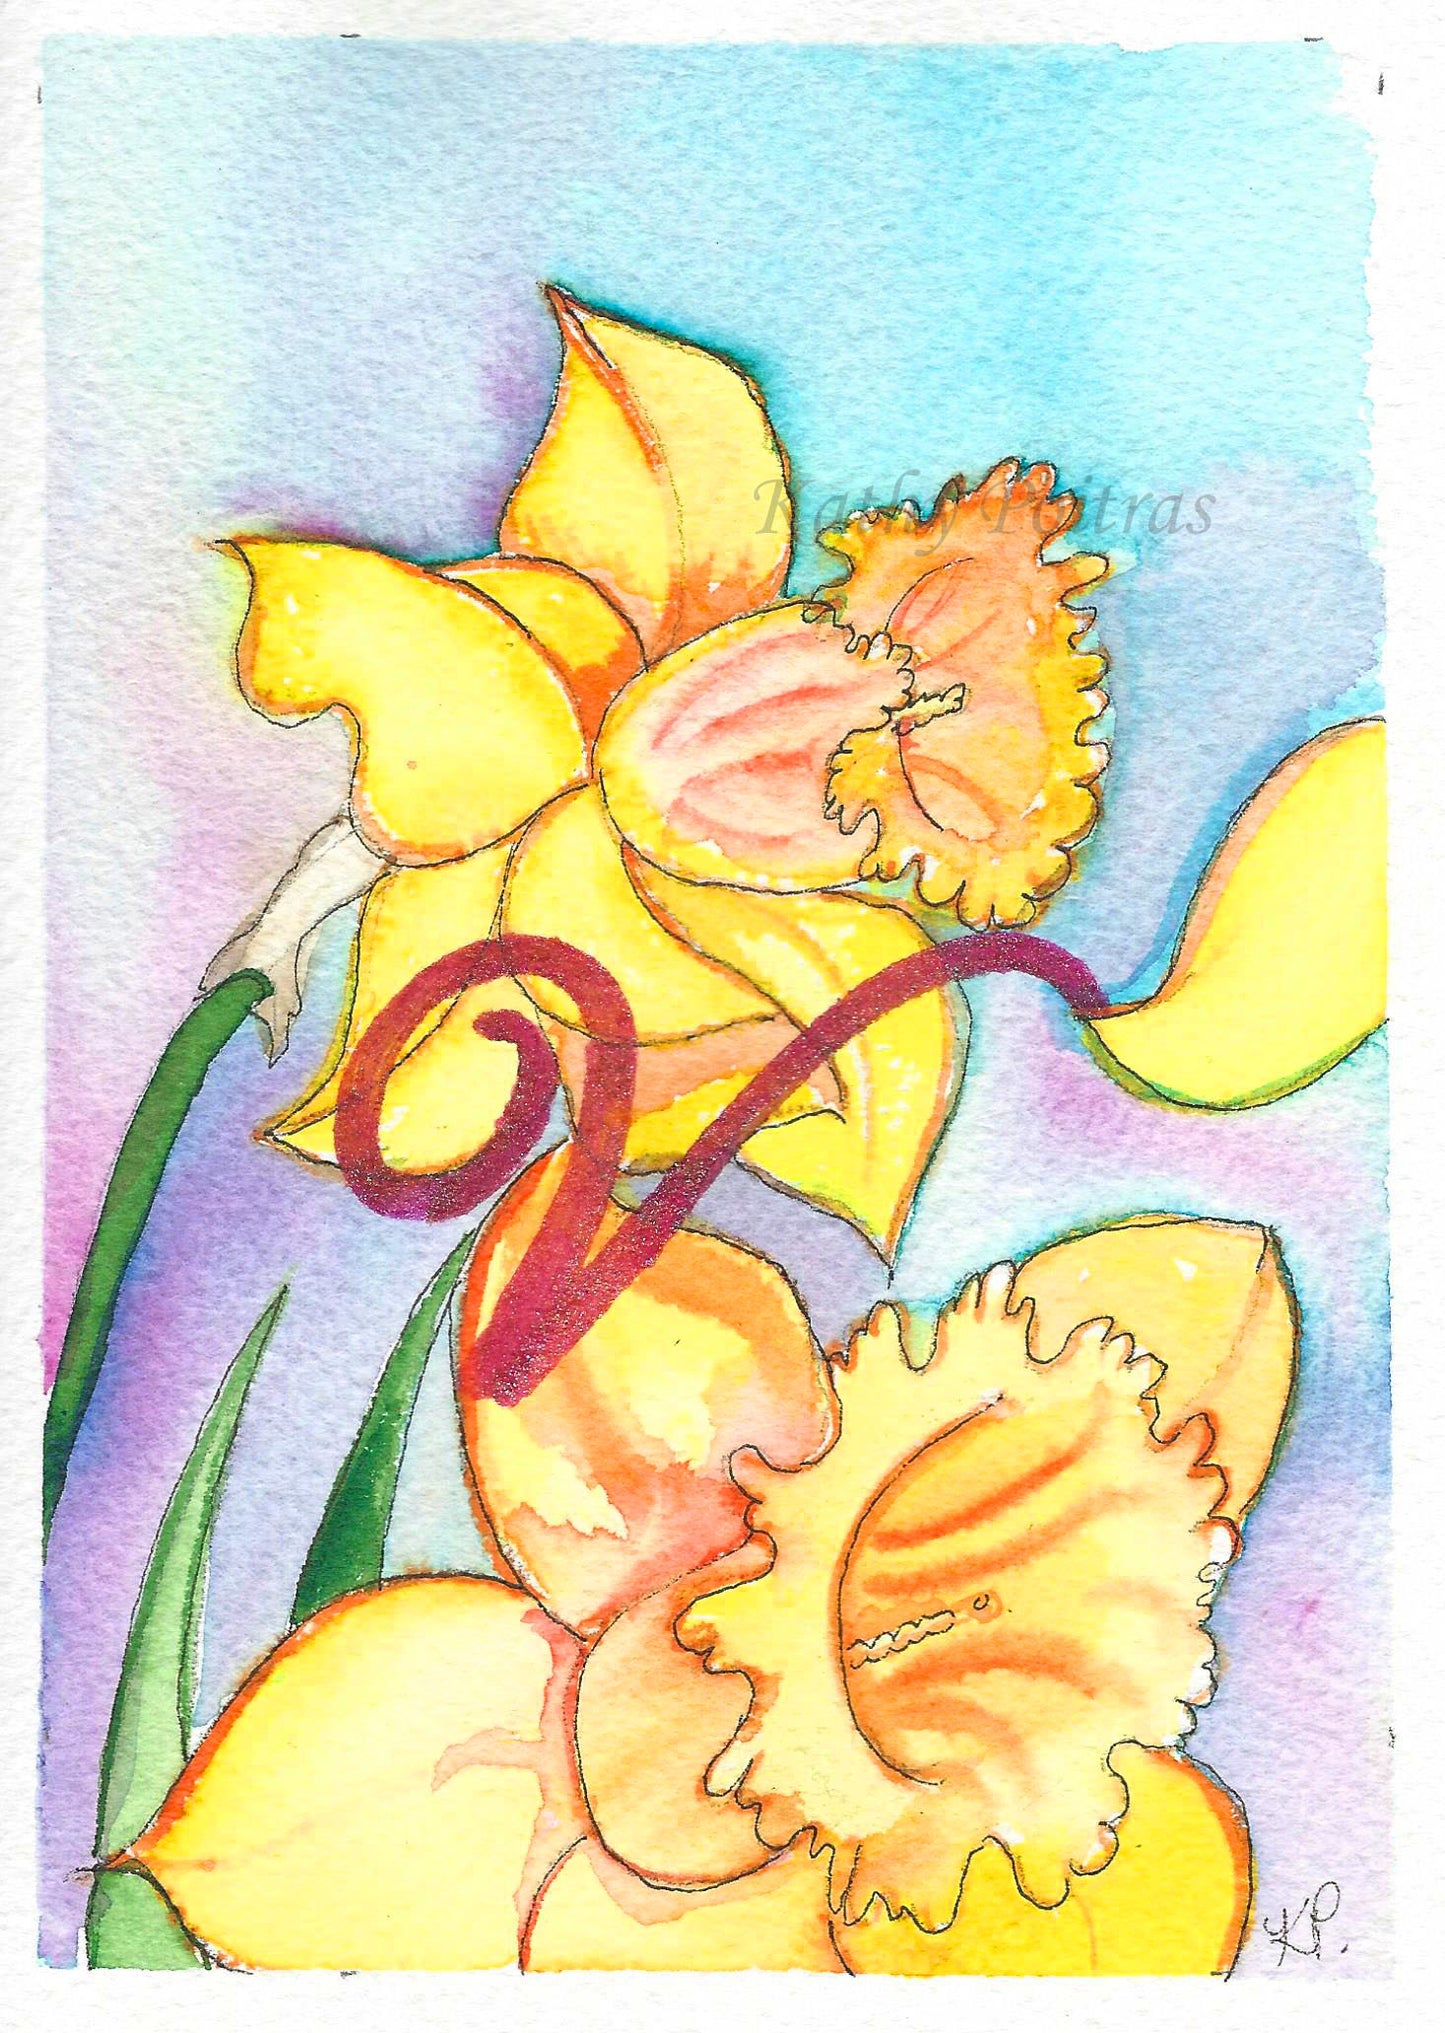 Original hand painted one of a kind art card, Greeting Card, Birthday Card, Mothers Day Card, watercolor and ink.  Watercolor version.  Daffodils are the birth flower of the month for March. This flower of the month card is personalized with a fancy letter V by artist Kathy Poitras  